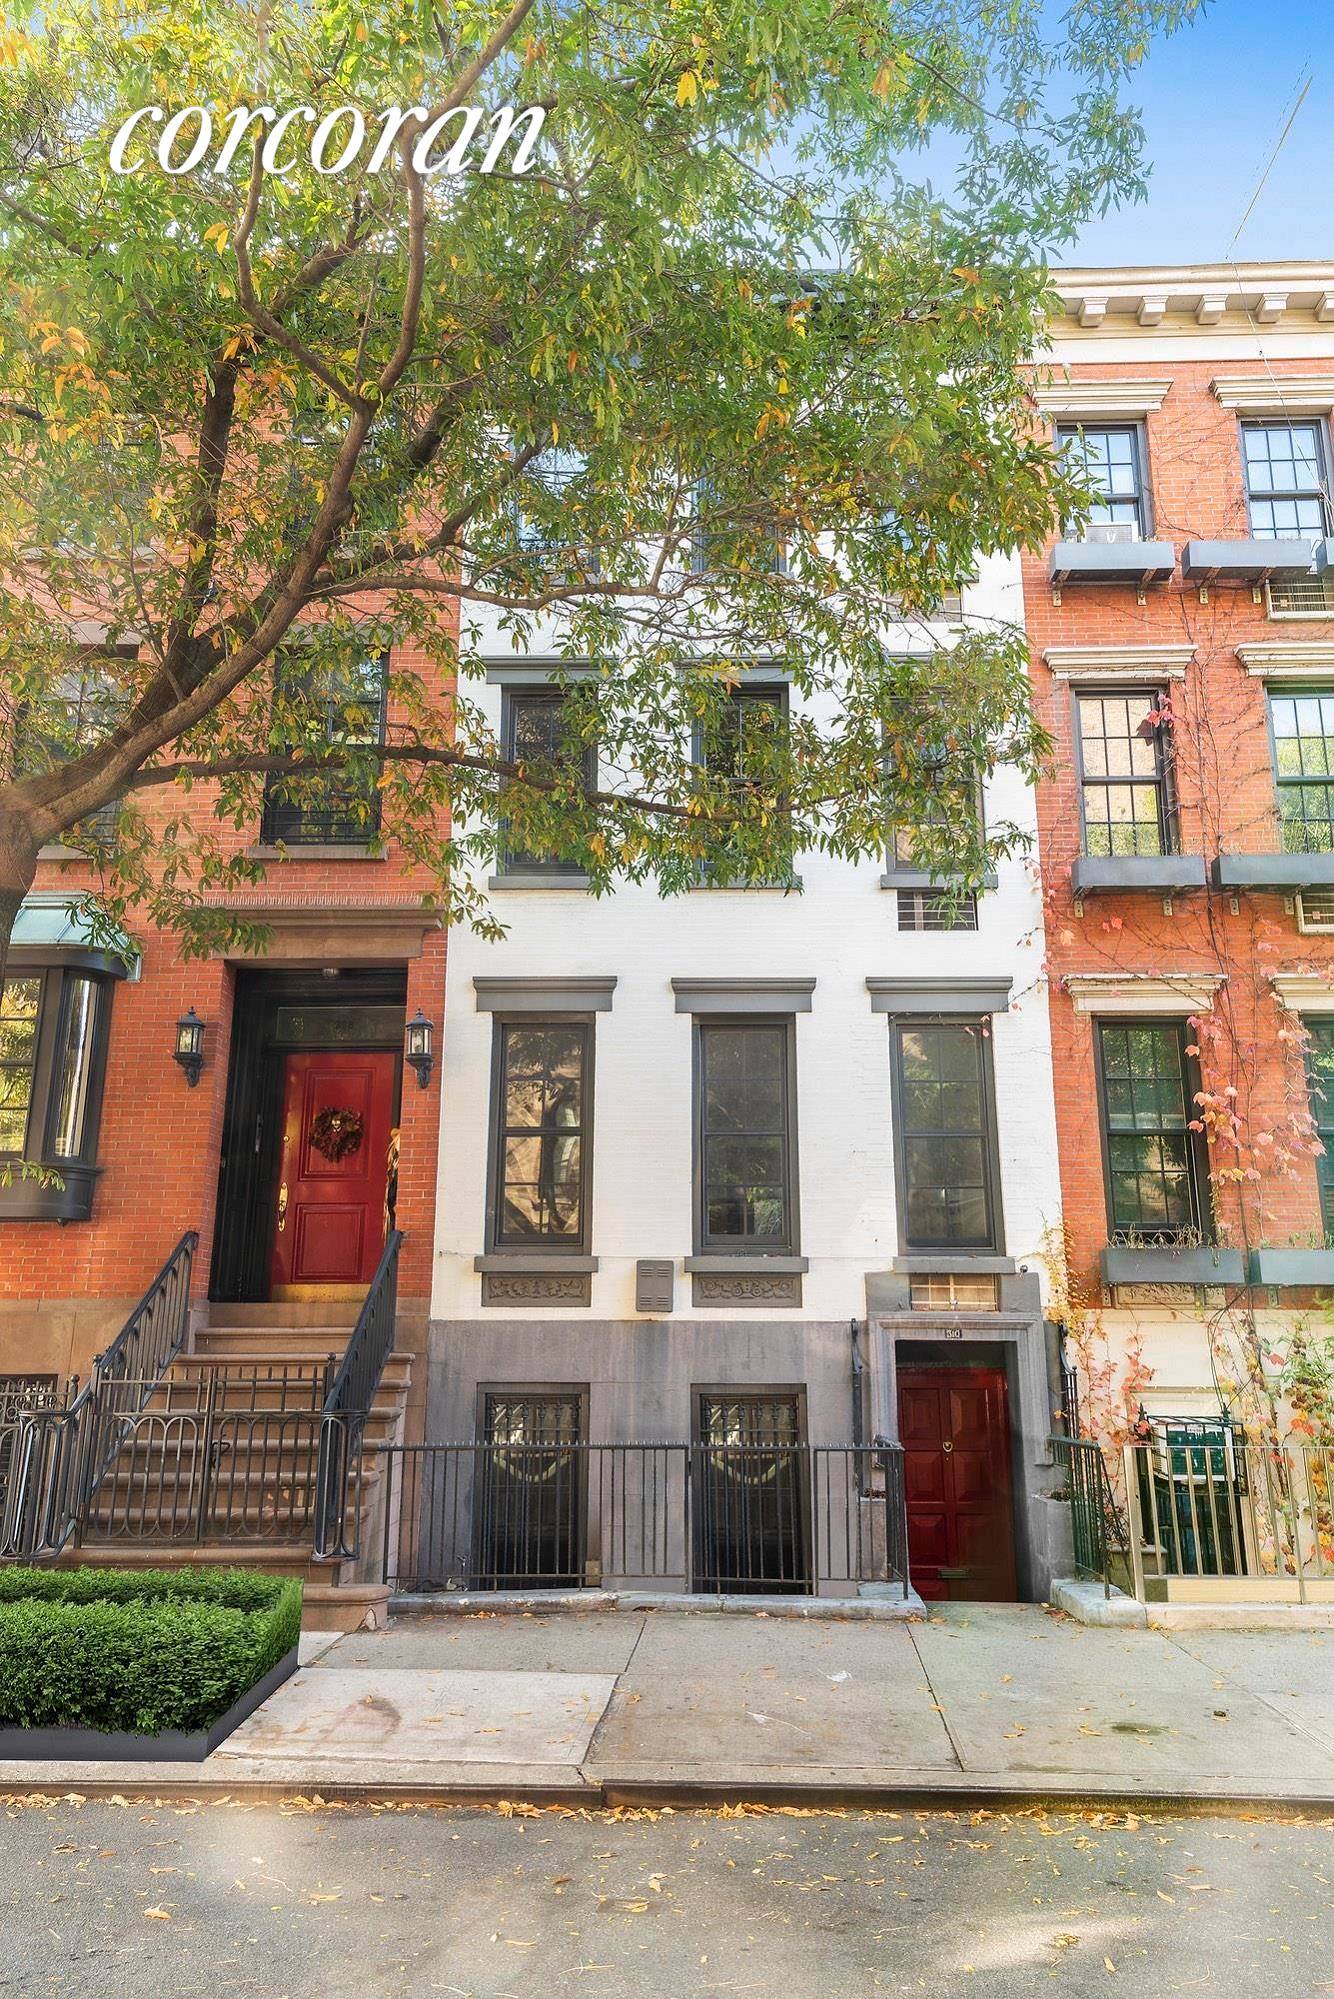 Charming Chelsea TownhouseAvailable for the first time in over 45 years, 310 West 19th Street is a quaint 19th Century, 4 story, 2 family brick townhouse ideally located on a ...